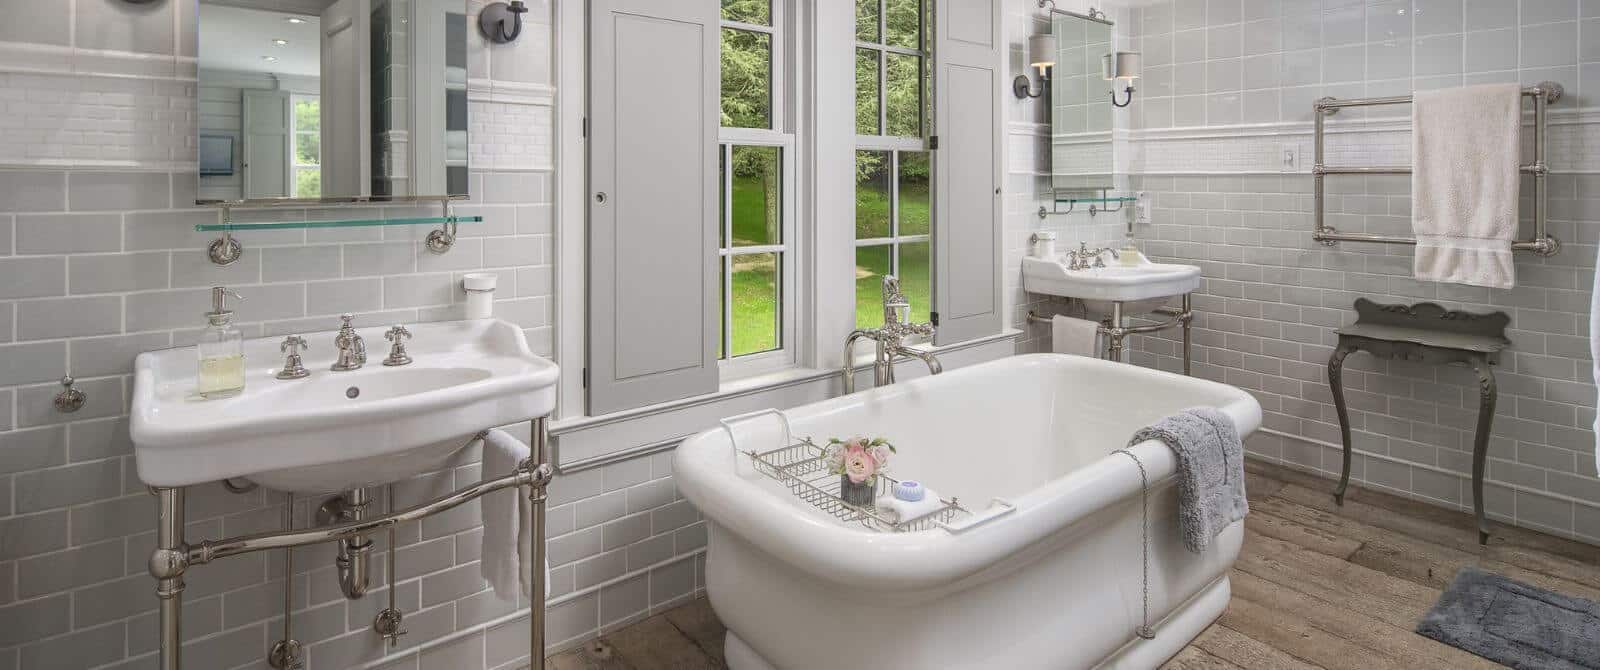 Bathroom with two pedestal sinks, each with a large mirror and soaker tub below a large window overlooking the outdoors